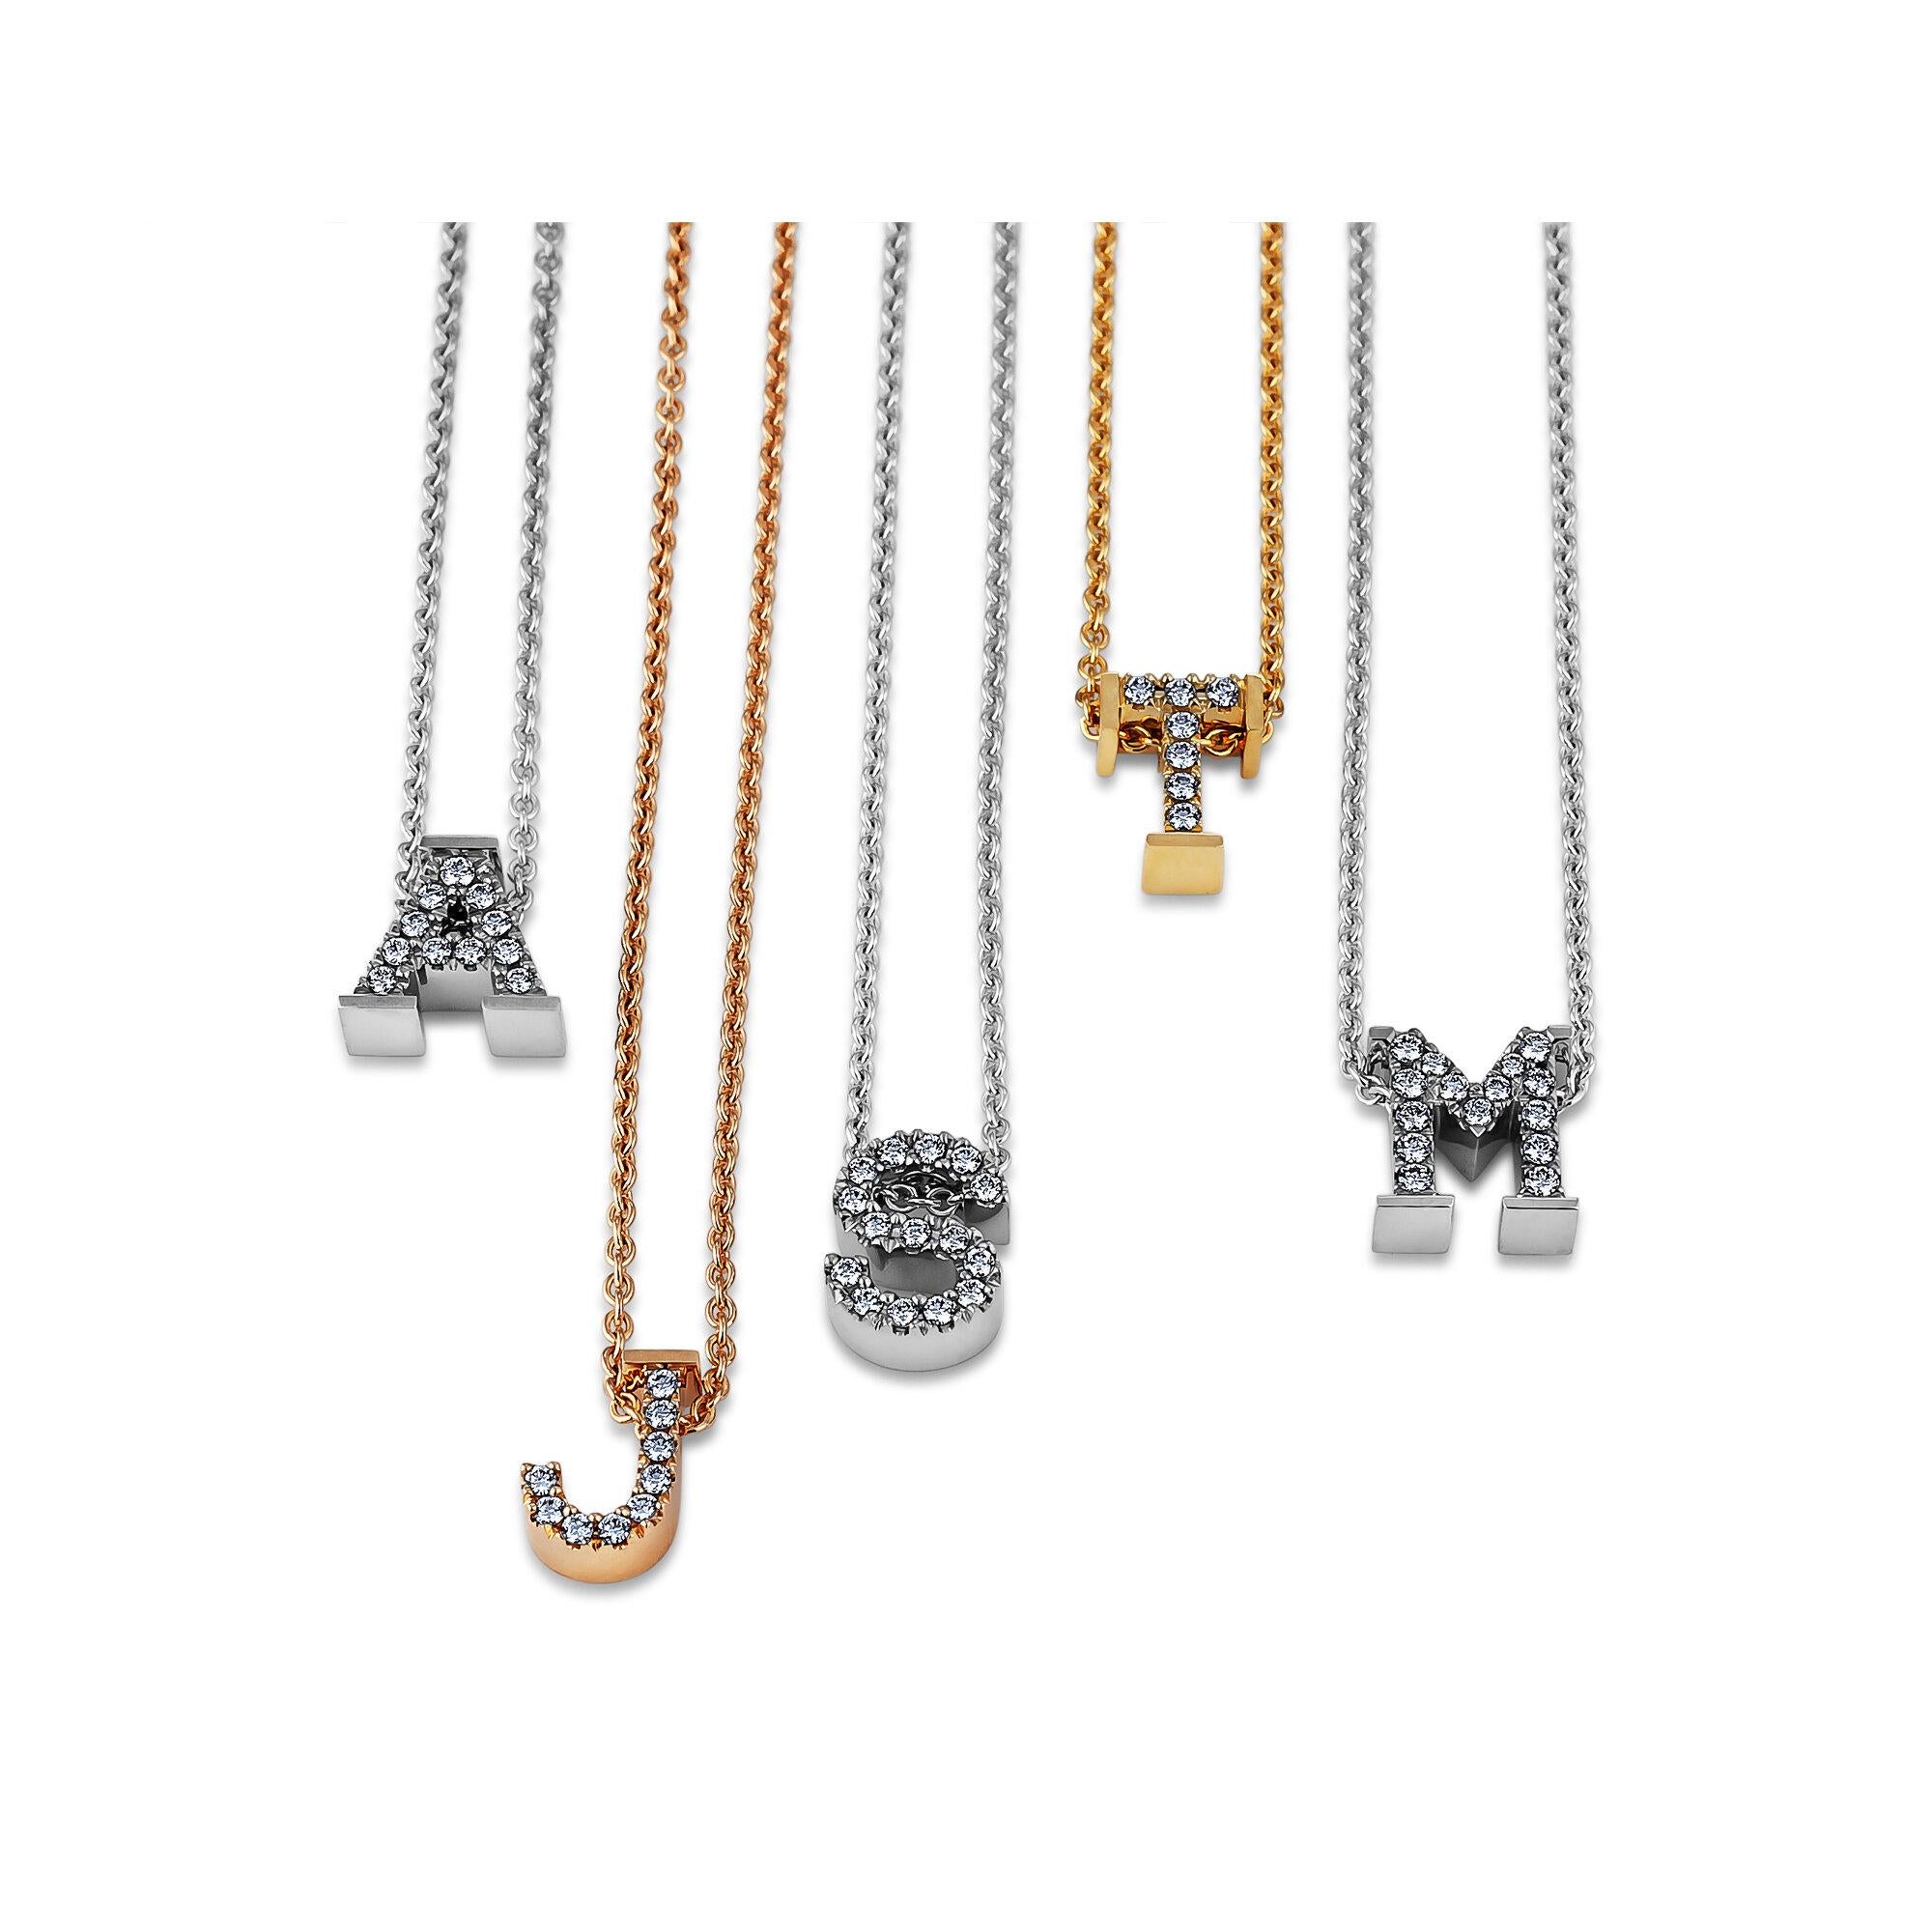 Whatever your initials, they will now be featured in bright lights.  Inspired by the written word and Art Deco typewriter key fonts, these three dimensional alphabet letter charms flash with diamonds and will make anyone's given name shine. 